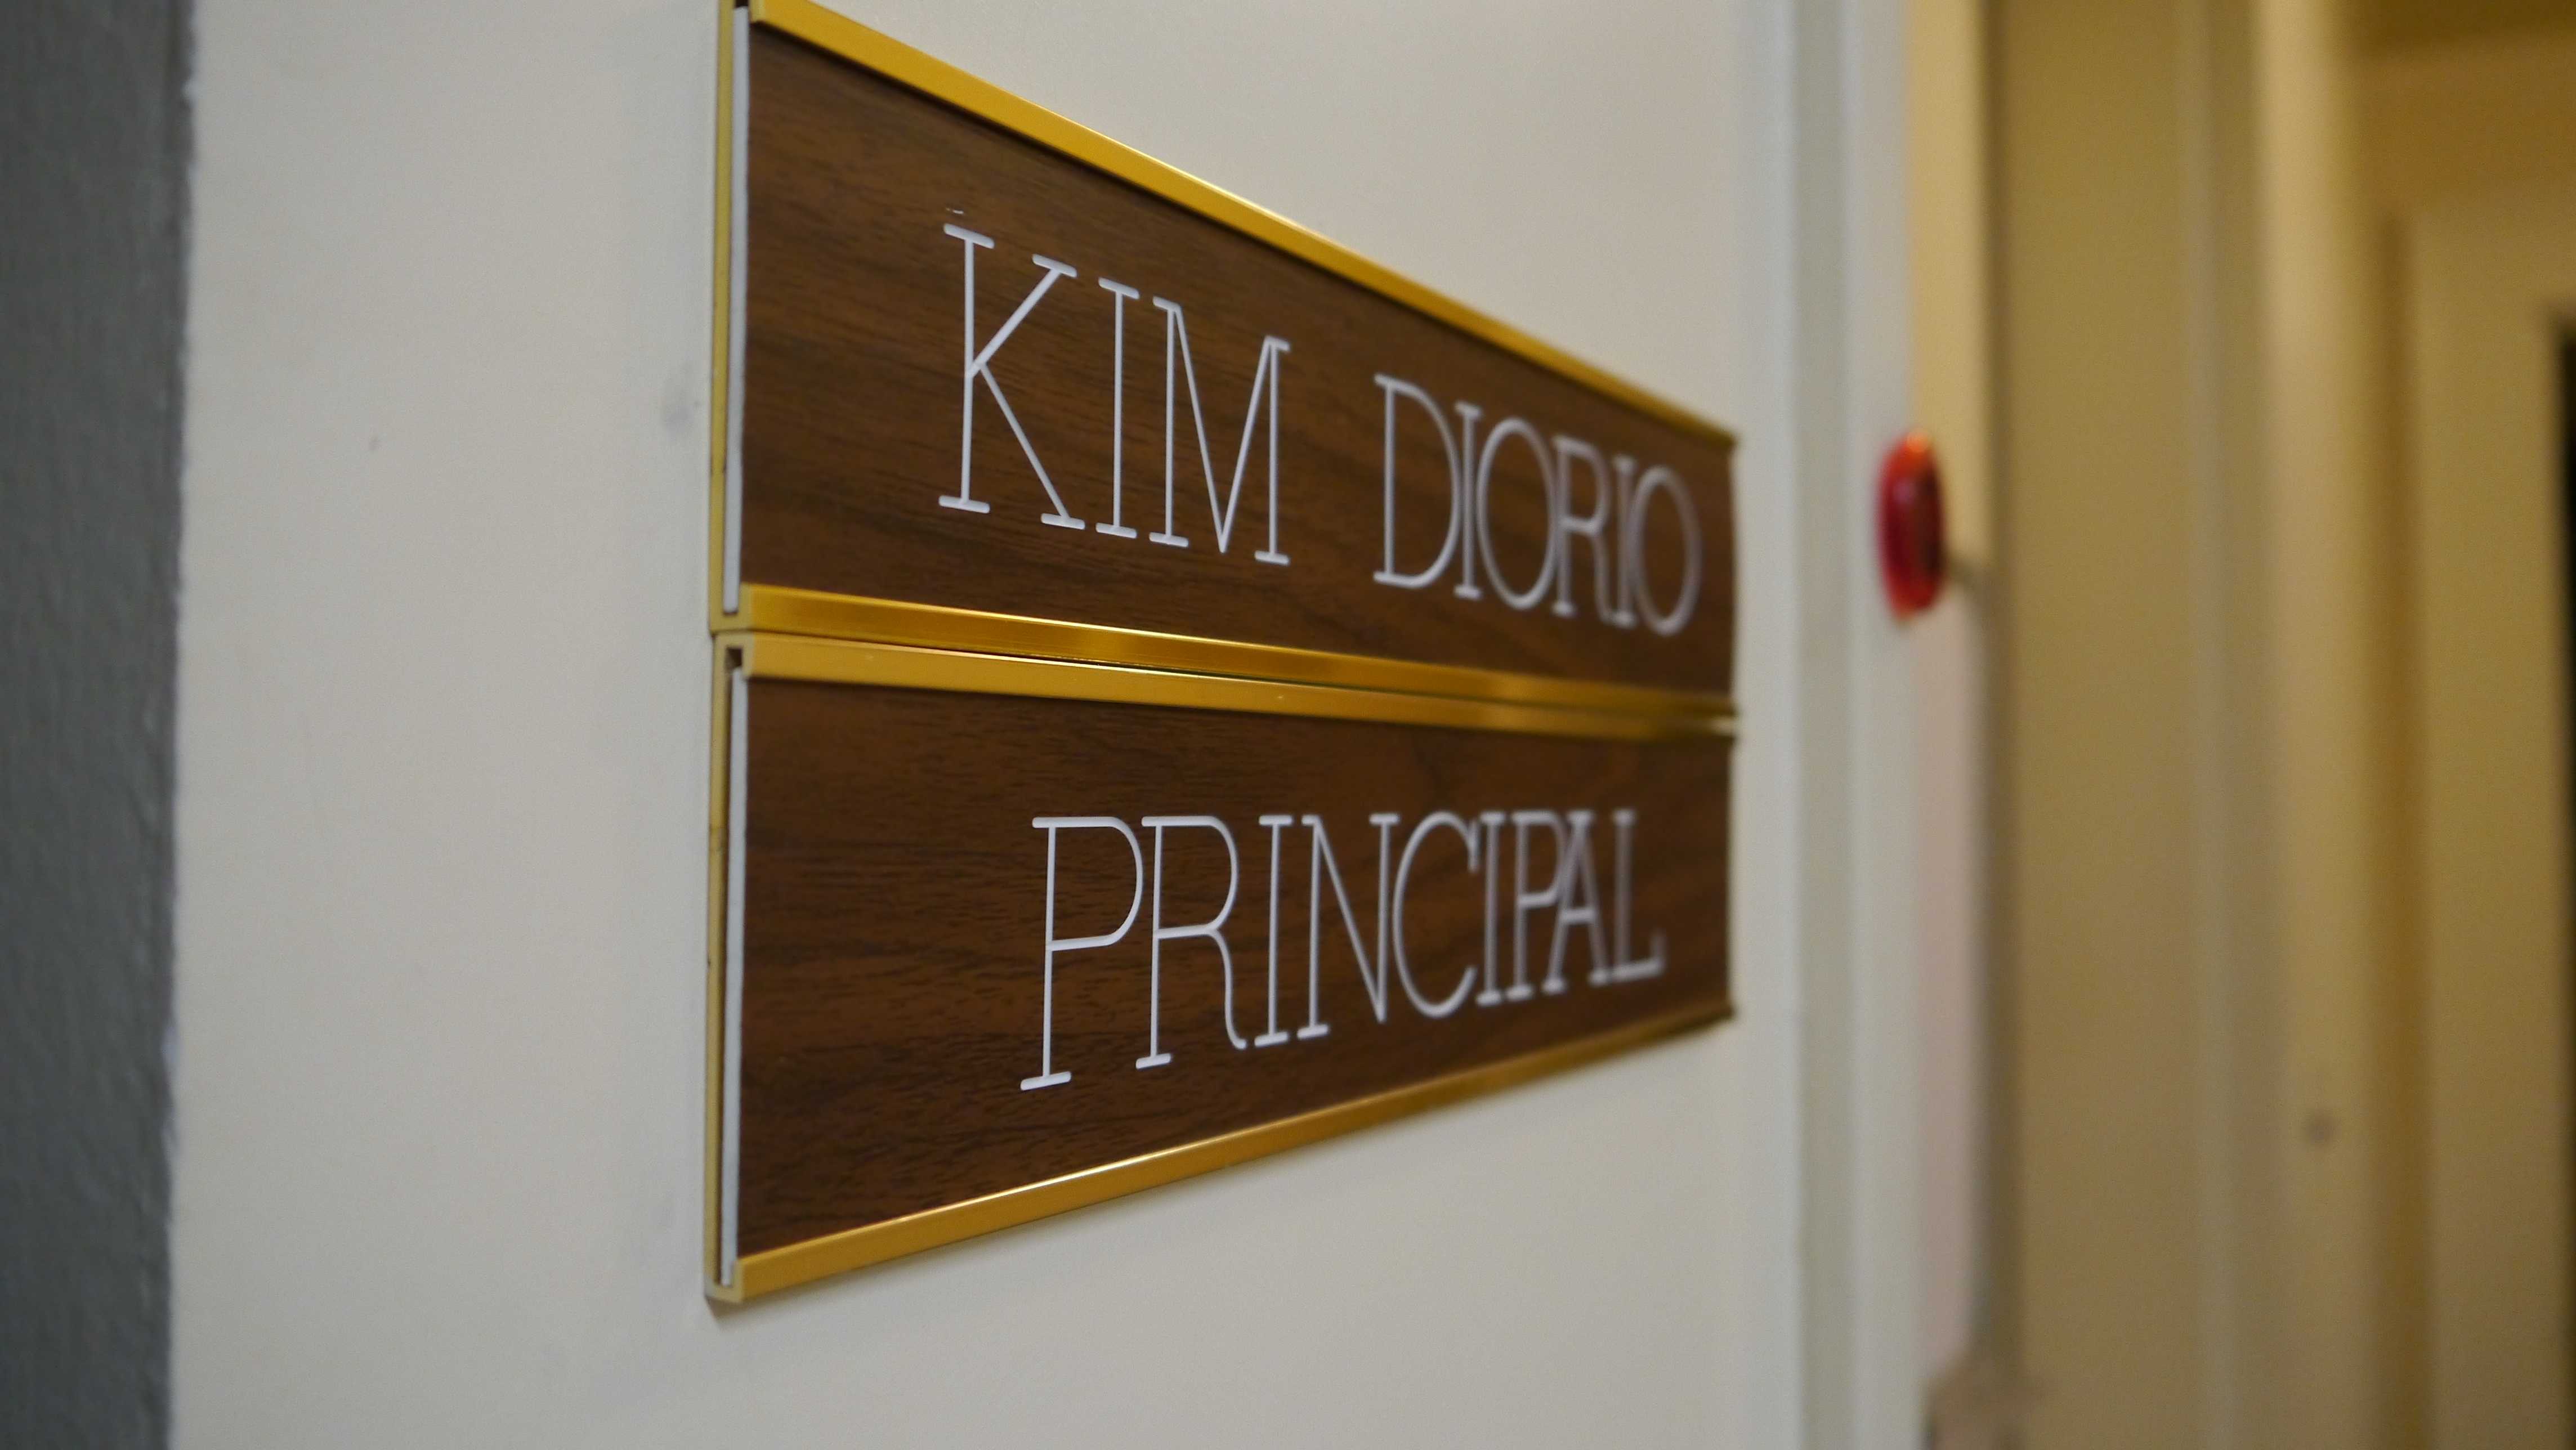 While Palo Alto High School Principal Kim Diorio is on medical leave, she is responding to district criticism regarding her handling of a on campus sexual assault allegation in 2016. In her response, Diorio emphasized transparency as well as continued progress for the Paly community. “Now, more than ever, our students deserve better,” Diorio stated. 